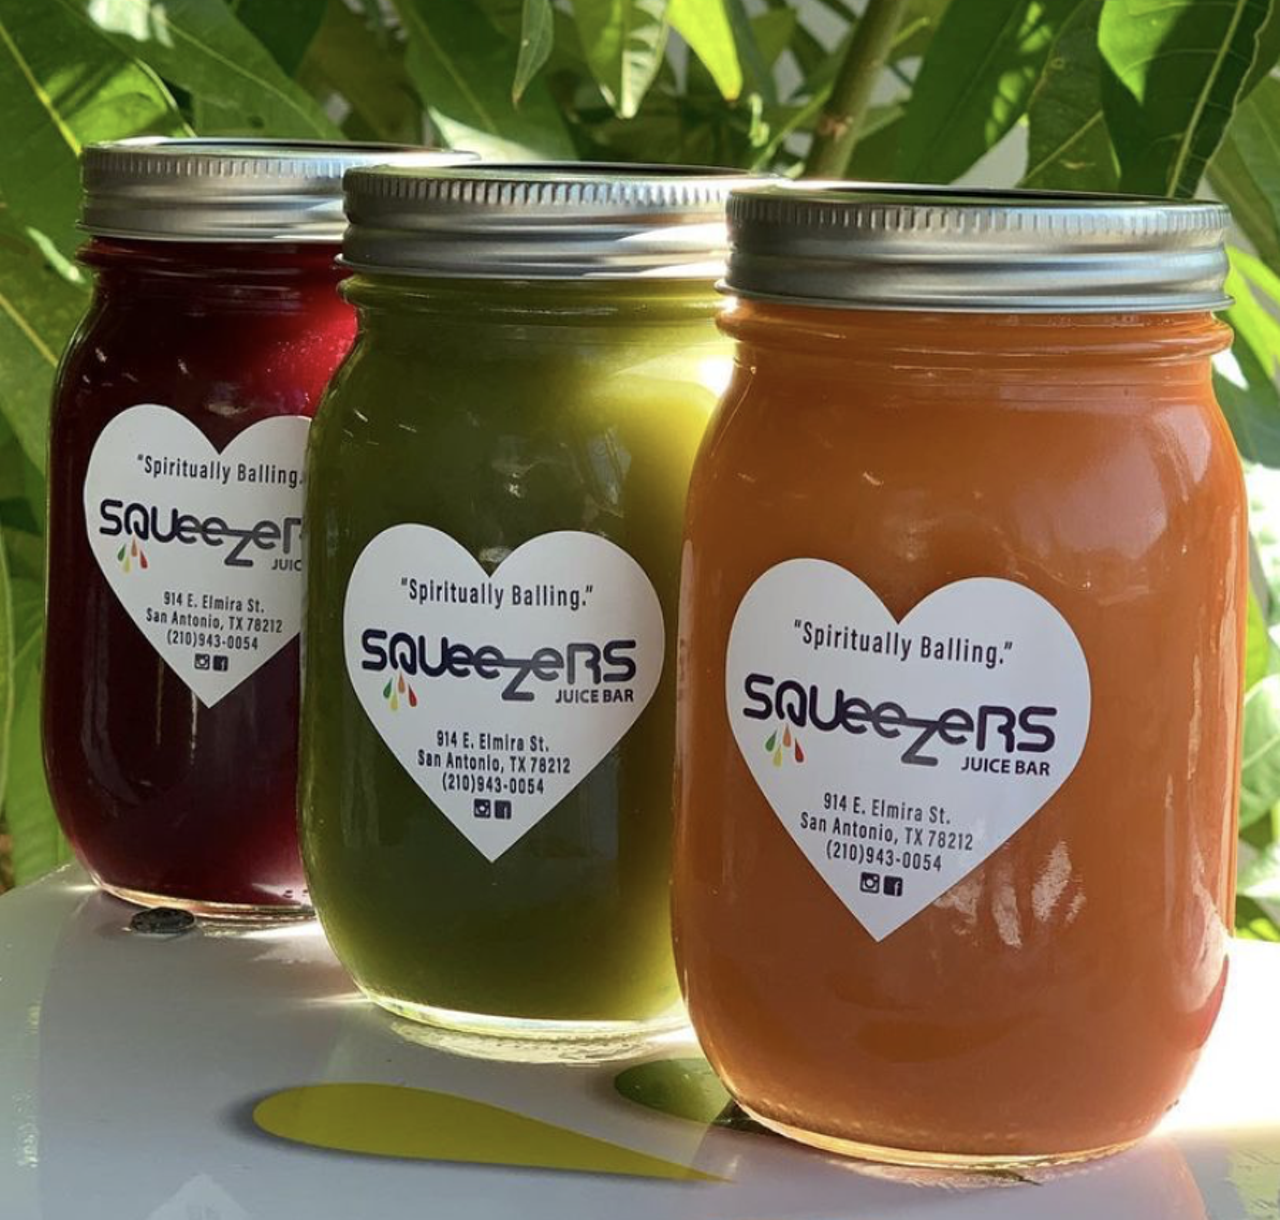 Squeezers
914 East Elmira, (210) 943-0054, facebook.com/SQUeeZeRSco
Squeezers has everything you could want in a juice bar. Not only can you get a cold-pressed, made to order juice, but they offer meal replacement smoothies and cleanses as well. 
Photo via Instagram / squeezersco